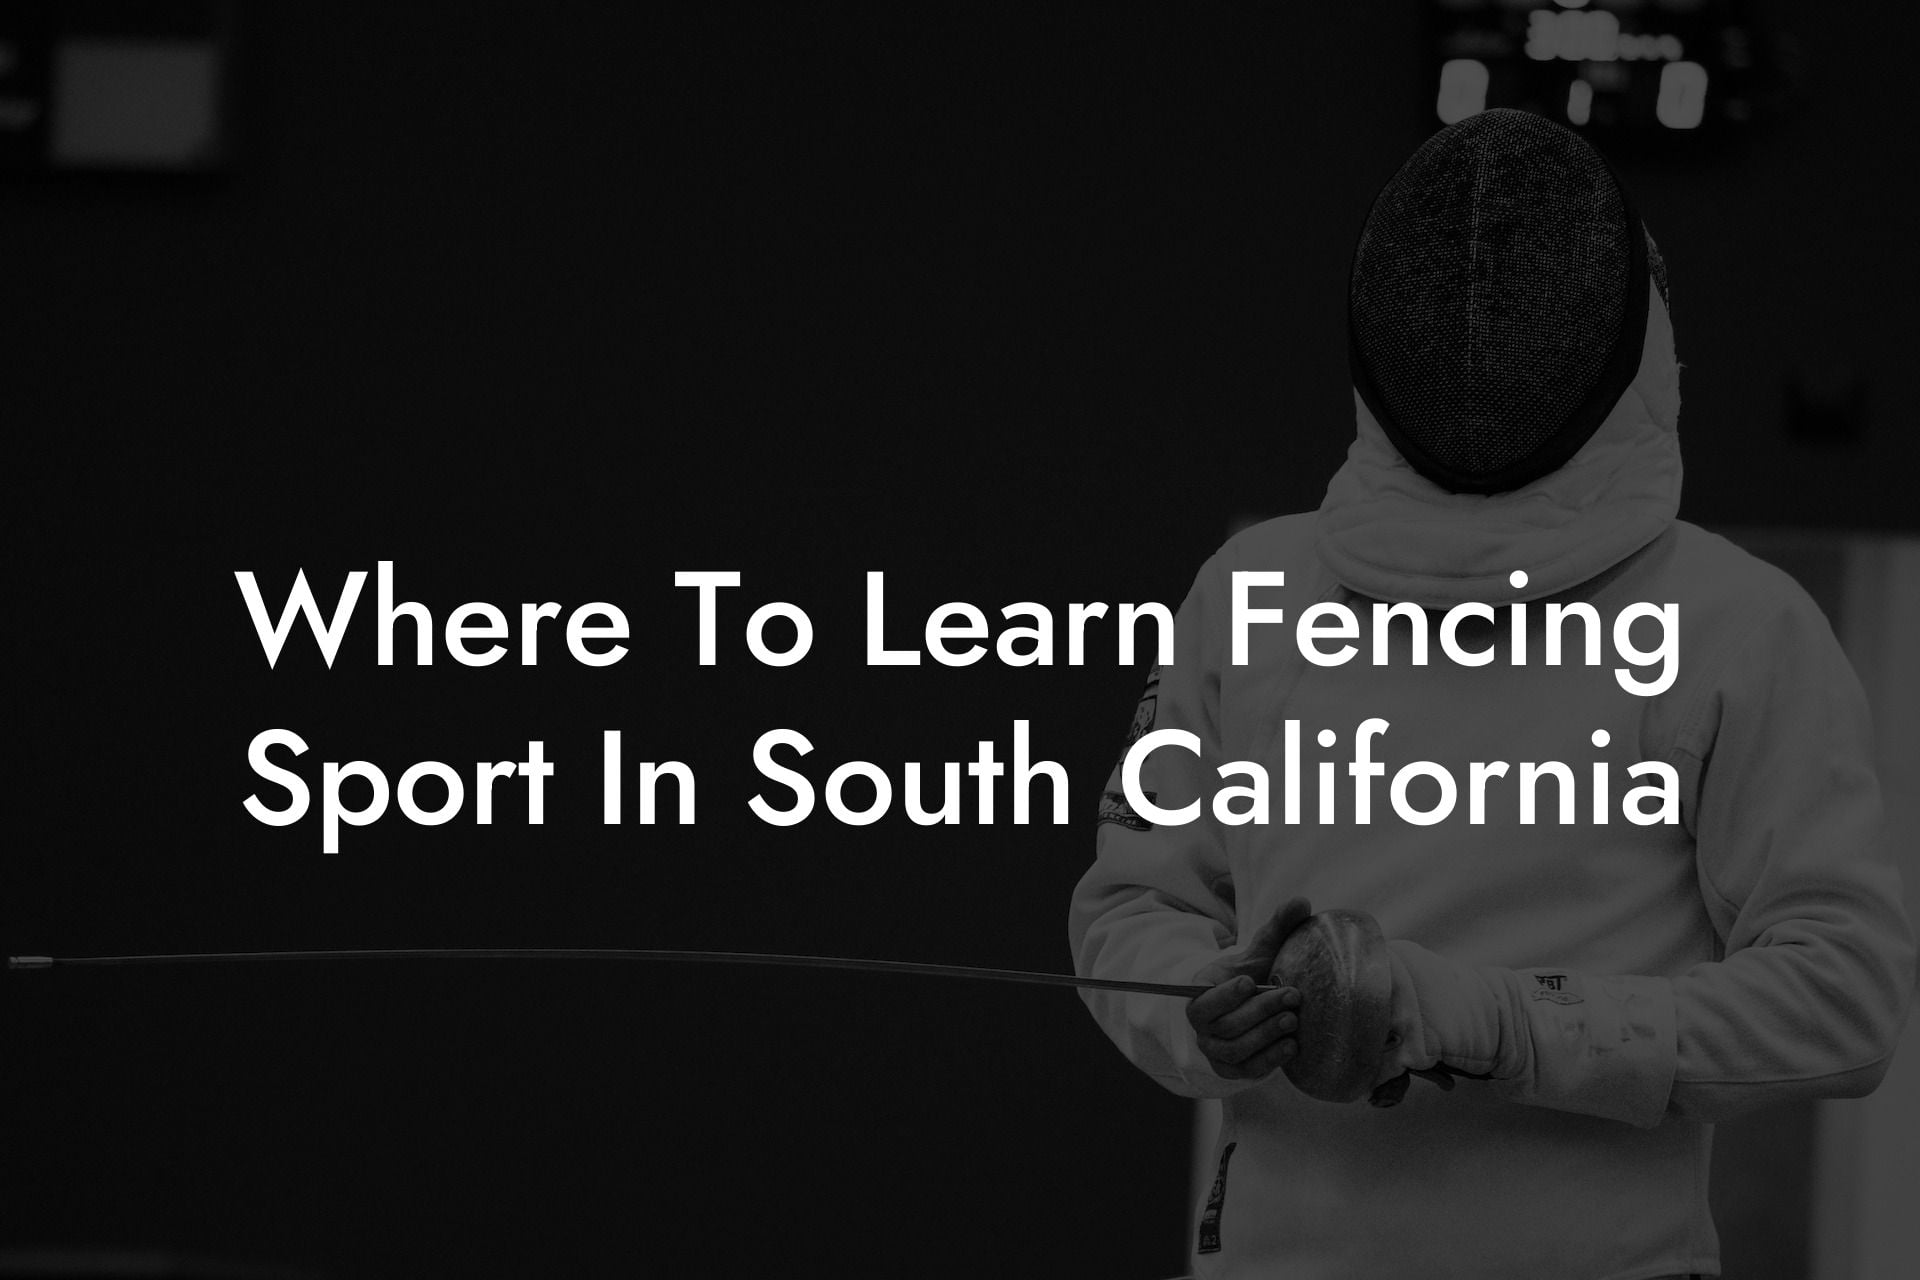 Where To Learn Fencing Sport In South California